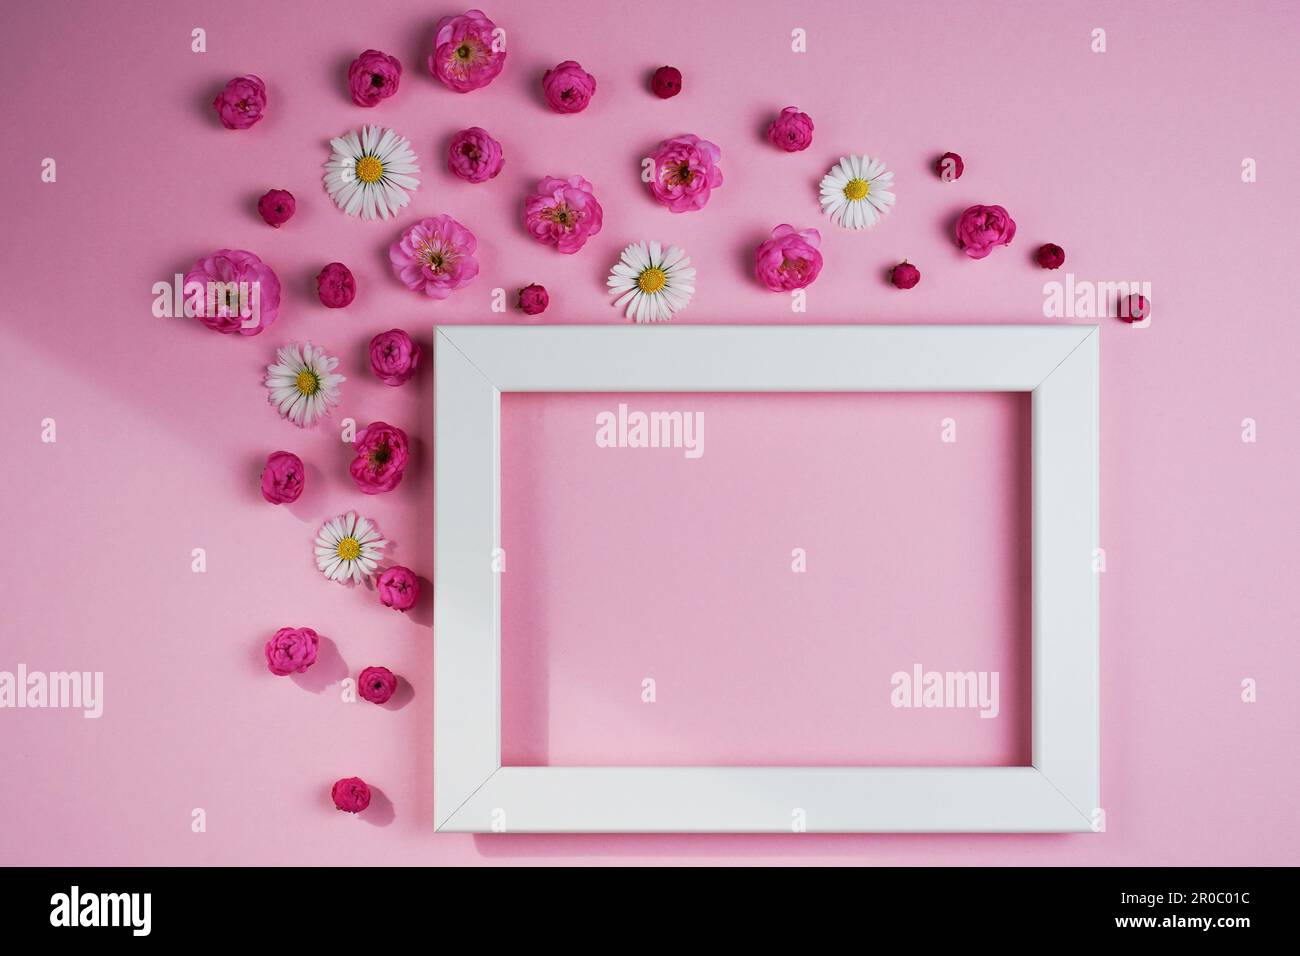 Flat lay, creative layout of blossoms, buds and petals of cherry, plum, daisy flowers with frame on pink background. Prunus Triloba Louiseania. Mockup Stock Photo